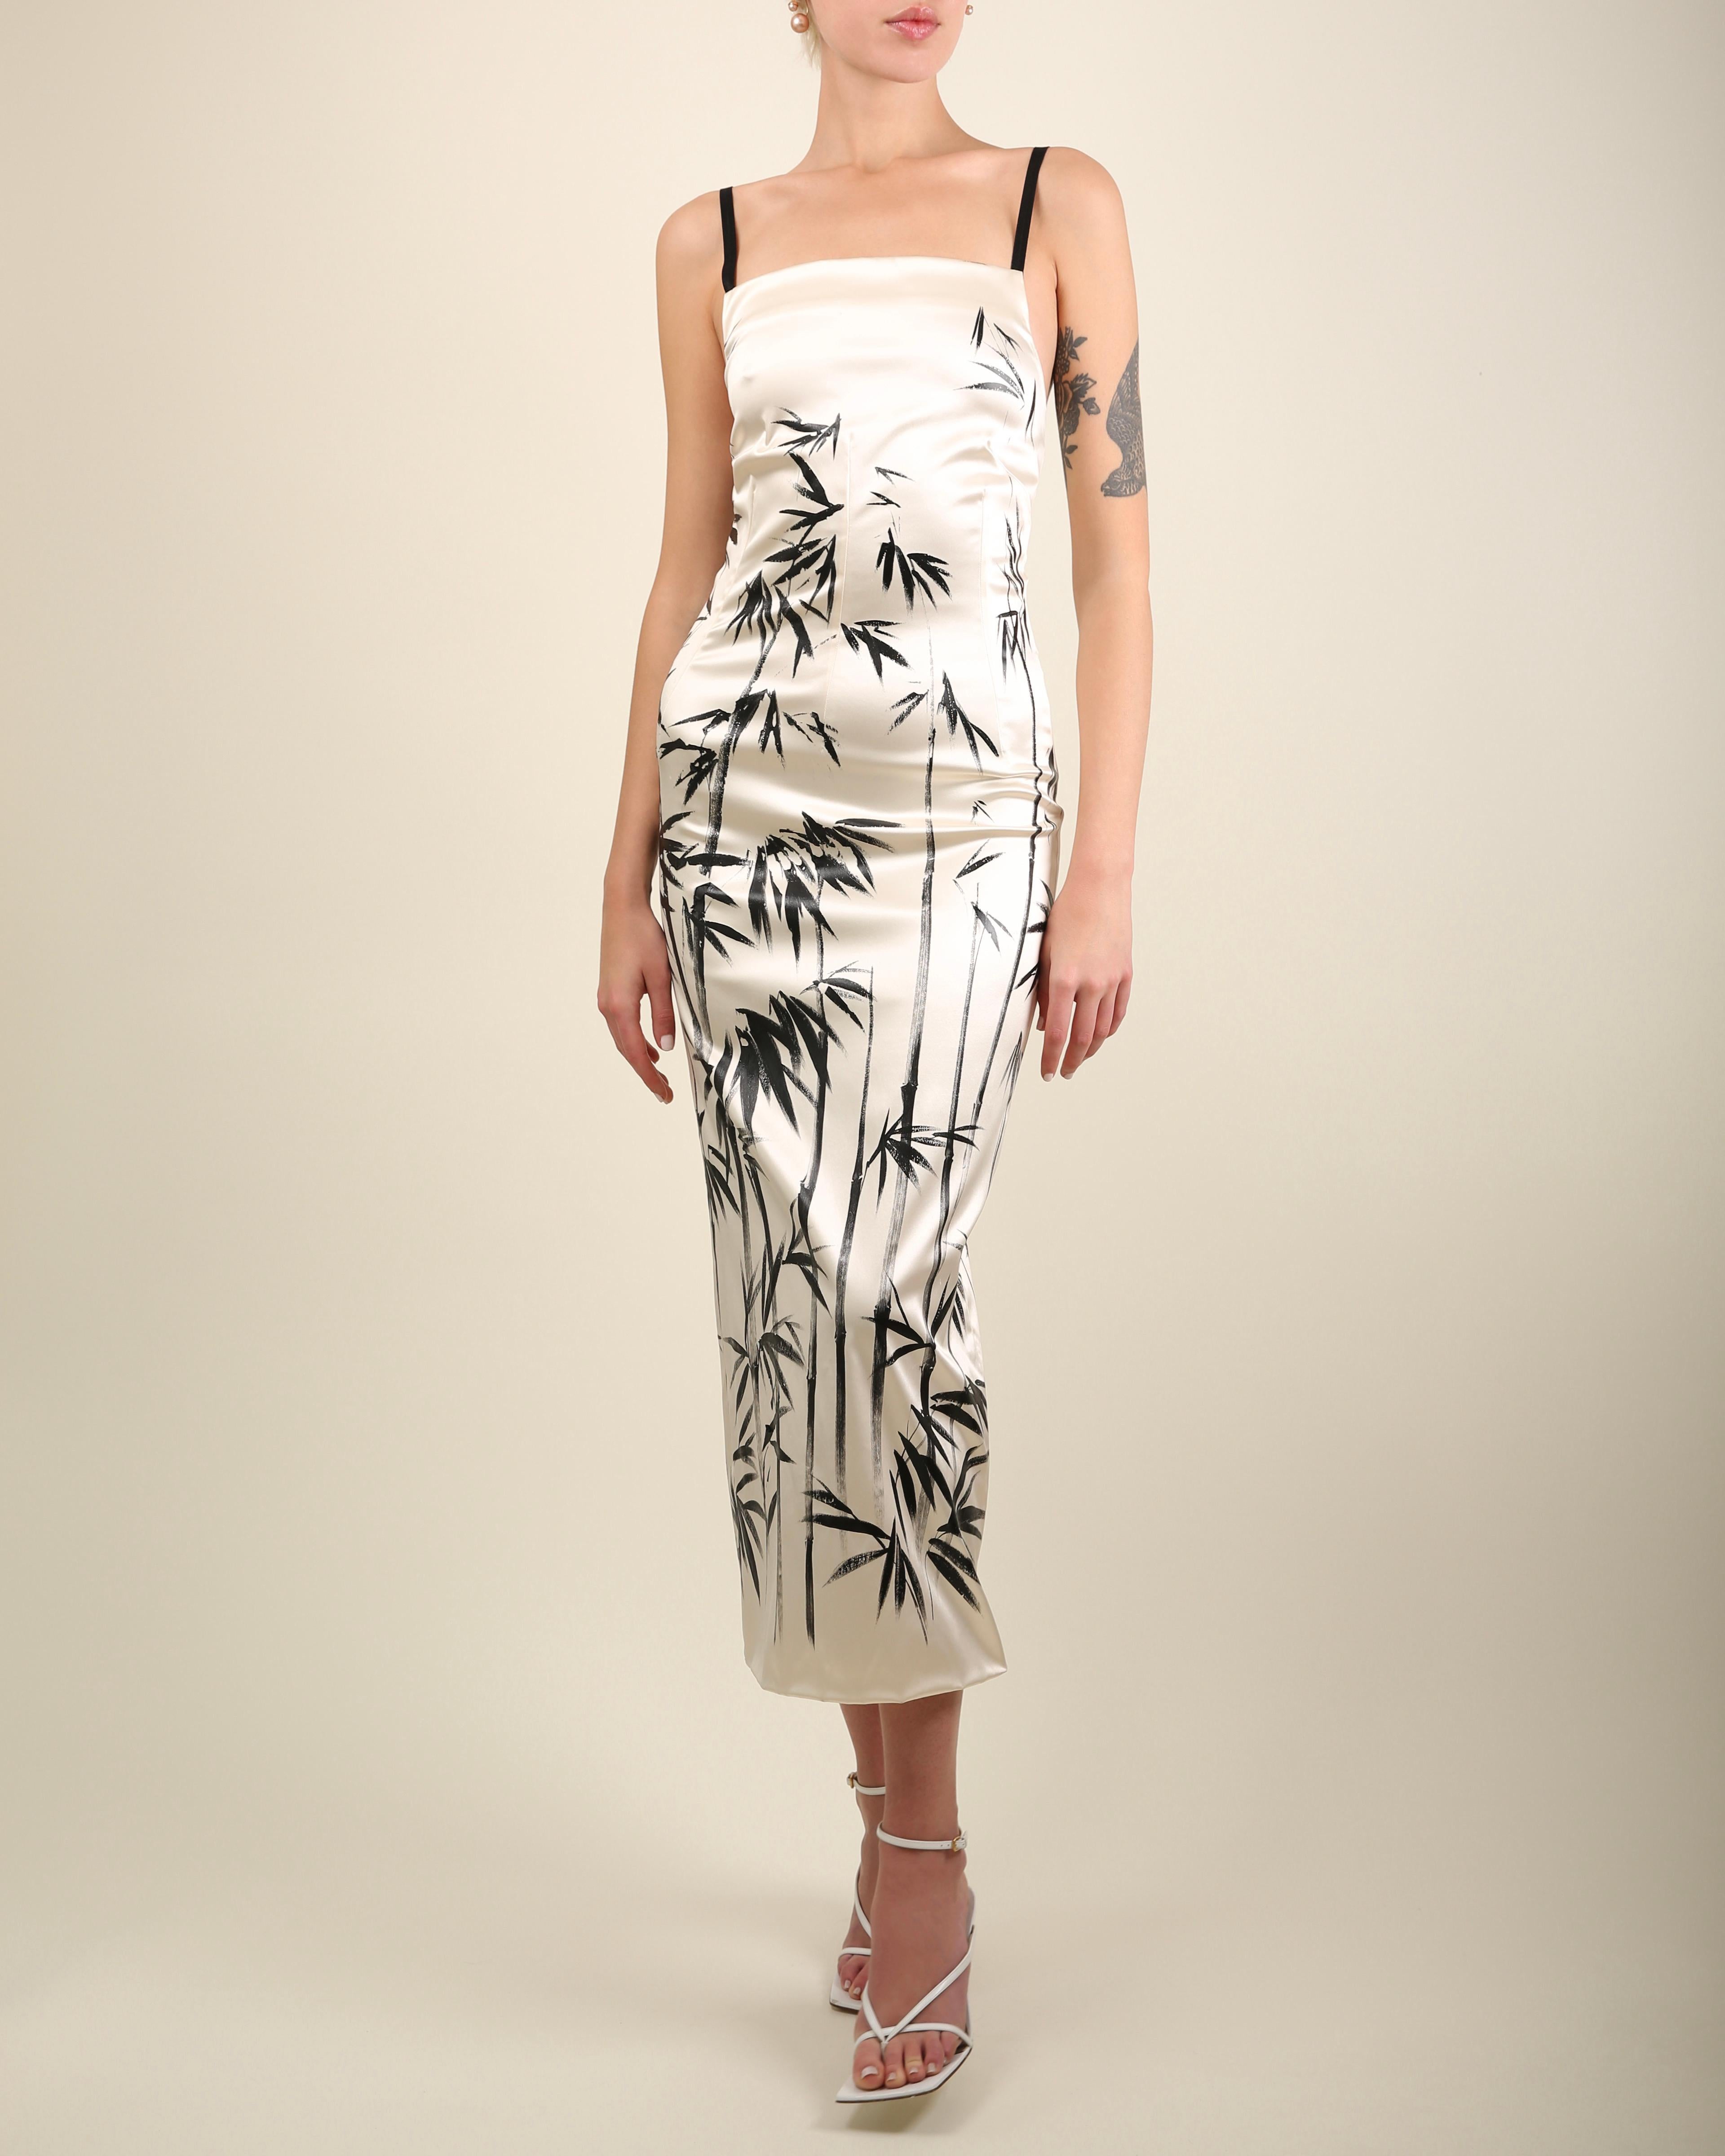 Dolce & Gabbana ivory and black satin midi length dress - possibly full length depending on your height - this can be easily shortened if you would prefer a shorter fit
Black brush stroke abstract print
Black elastic straps
Concealed black zip

FREE